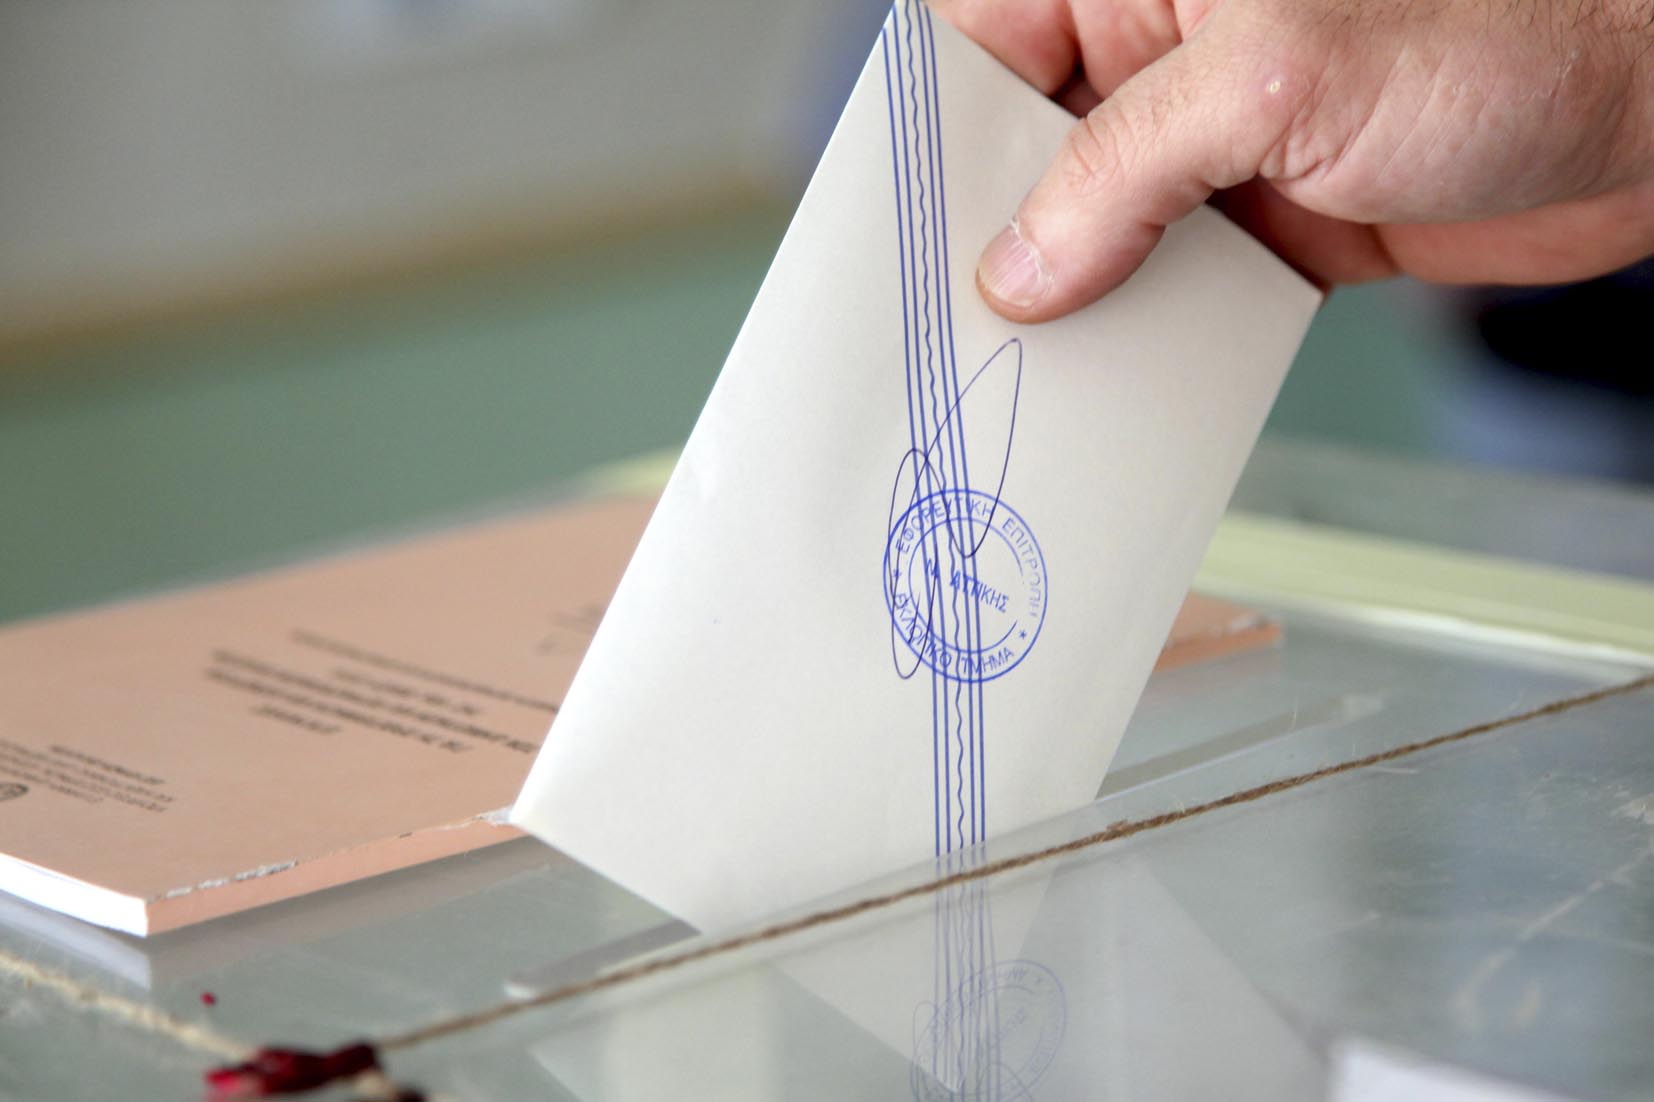 Greek Polls: ND stable lead, SYRIZA – PASOK battle for second place